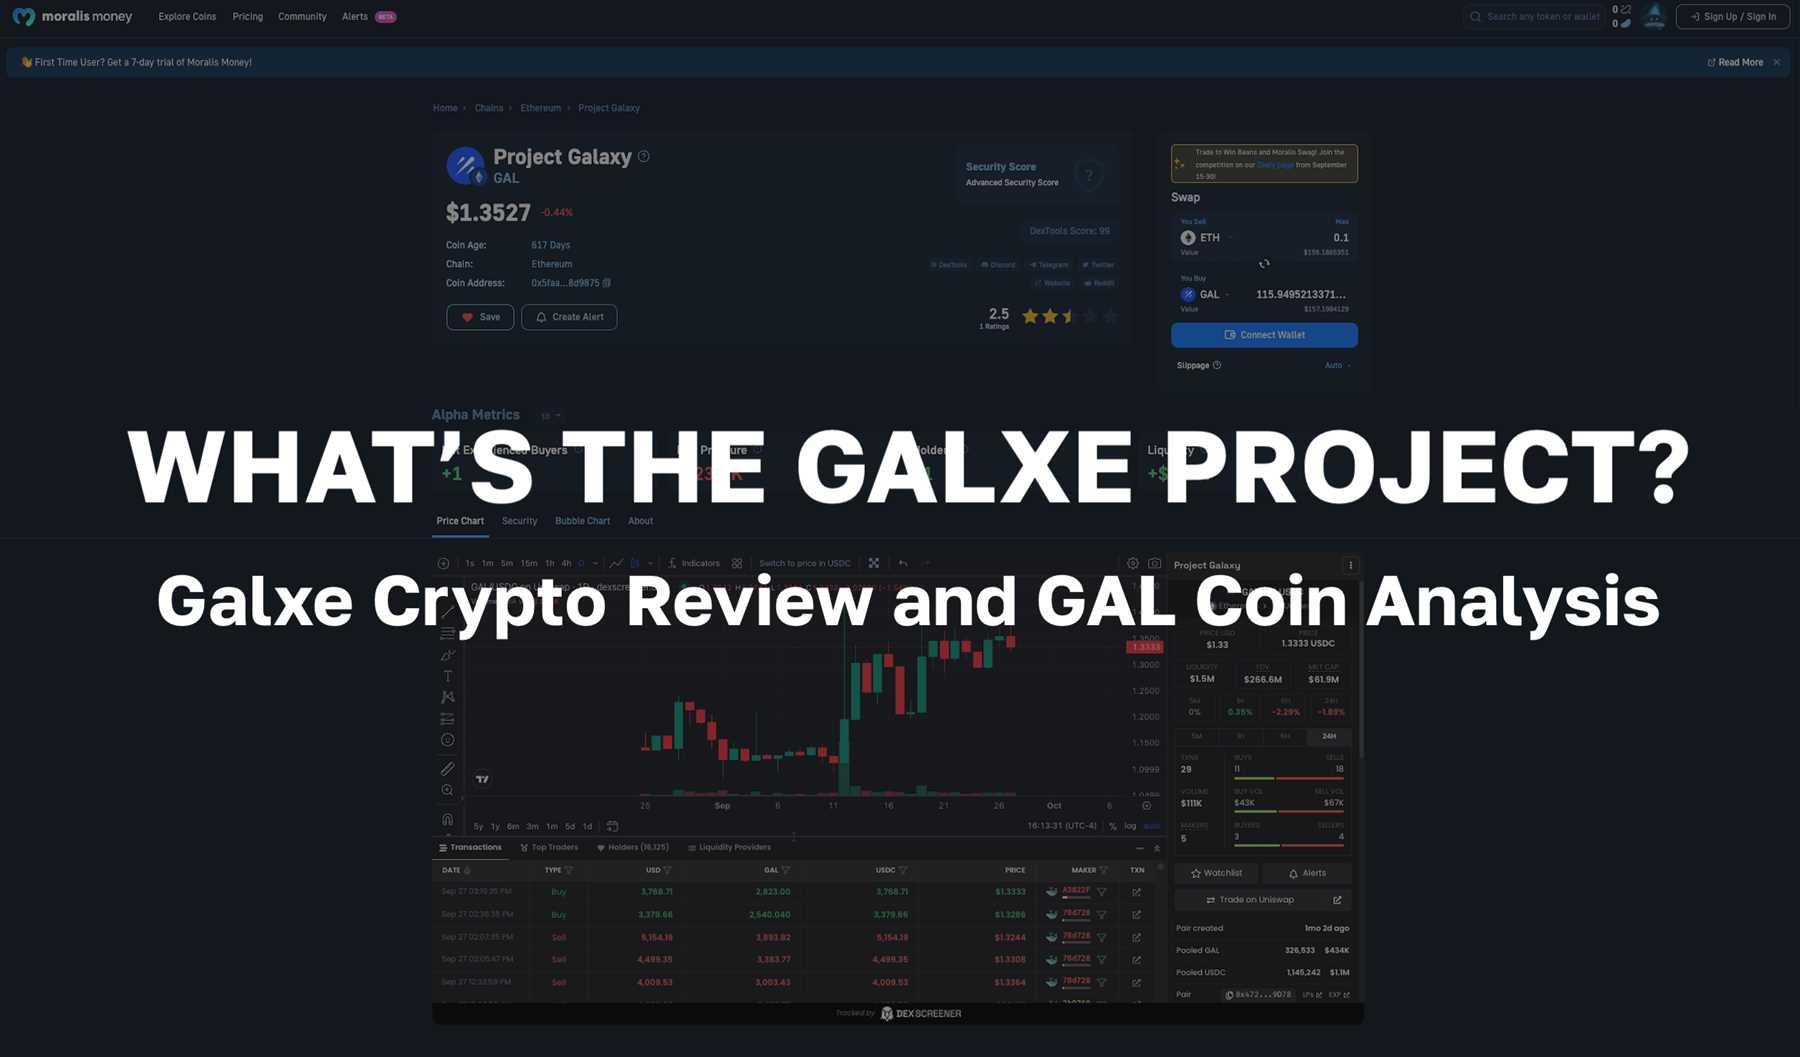 What is Galxe?